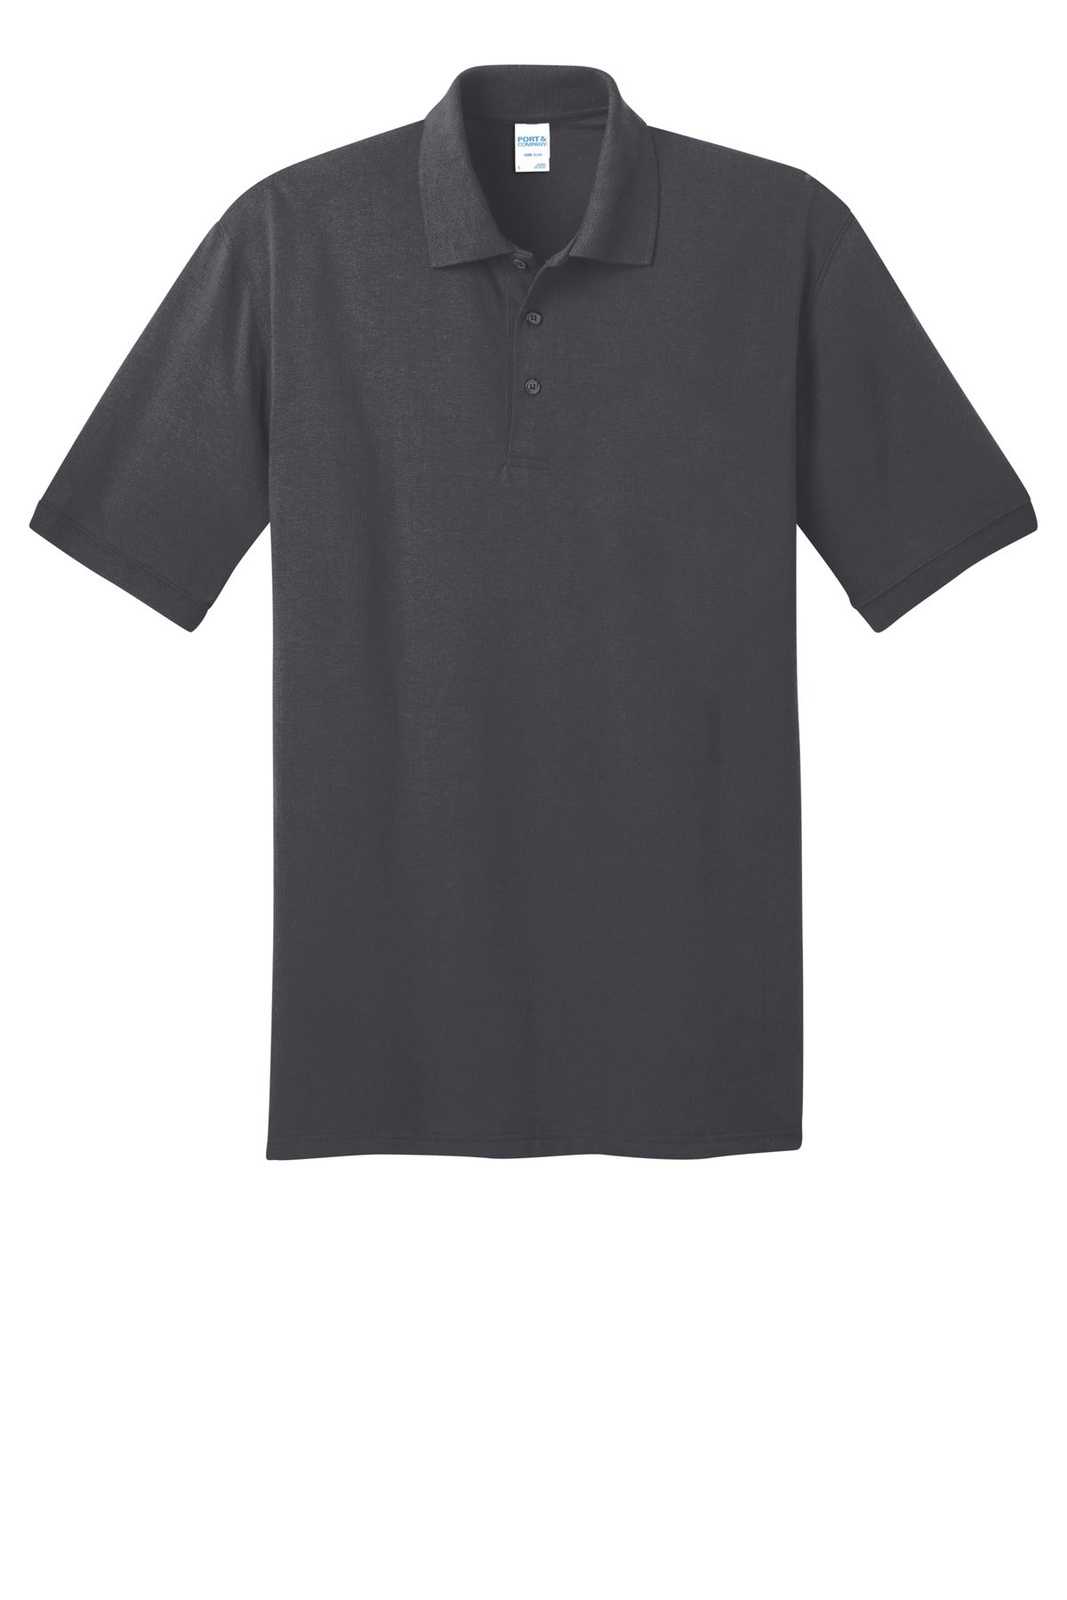 Port &amp; Company KP55T Tall Core Blend Jersey Knit Polo - Charcoal - HIT a Double - 3